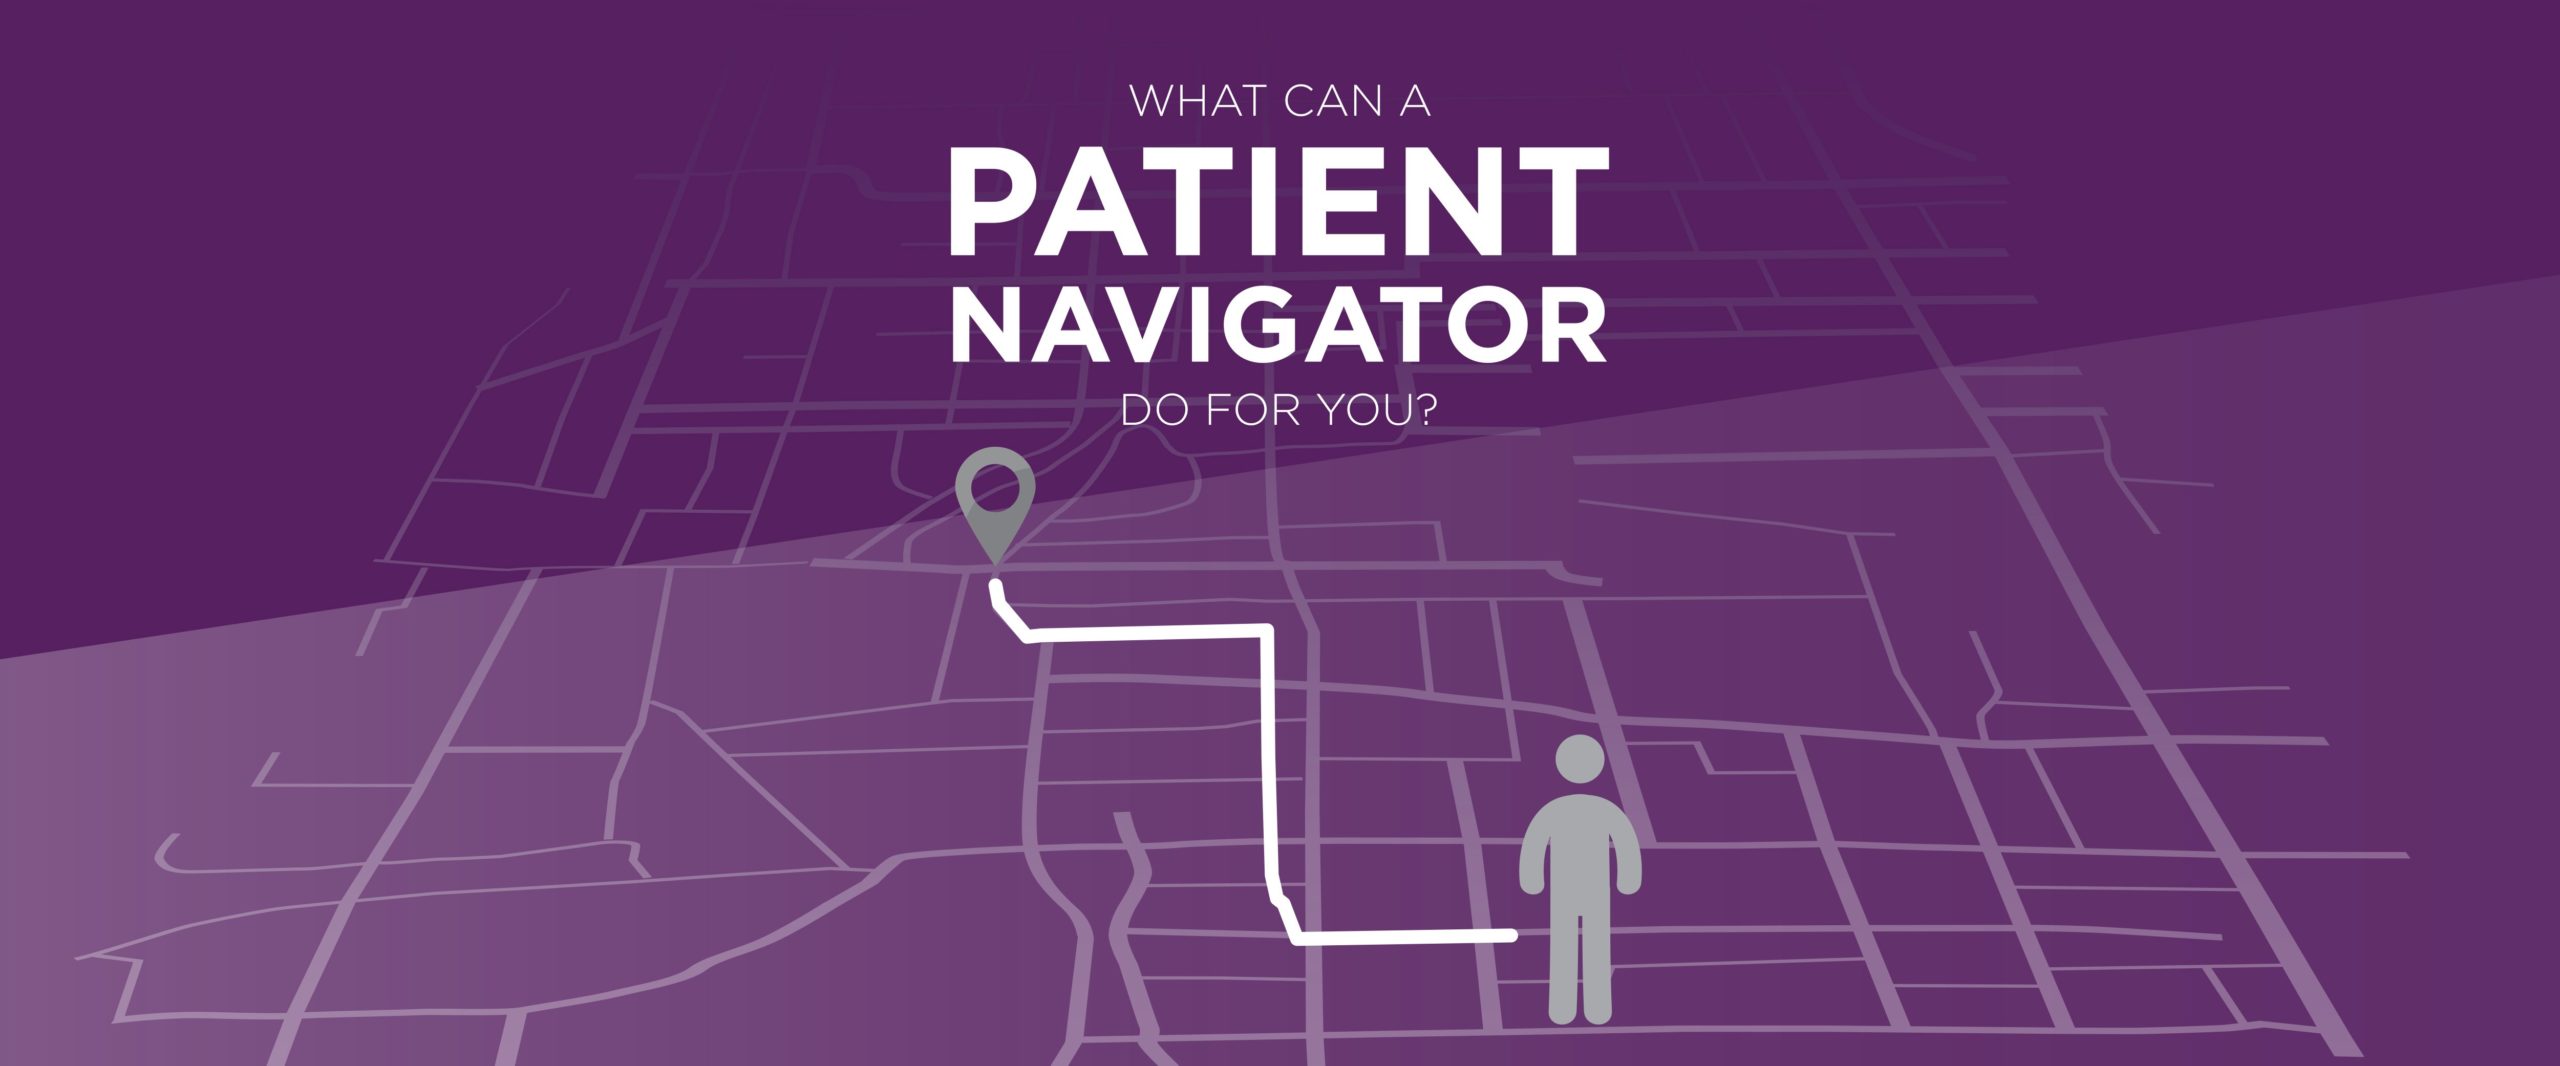 What can a Patient Navigator do for you? Blog